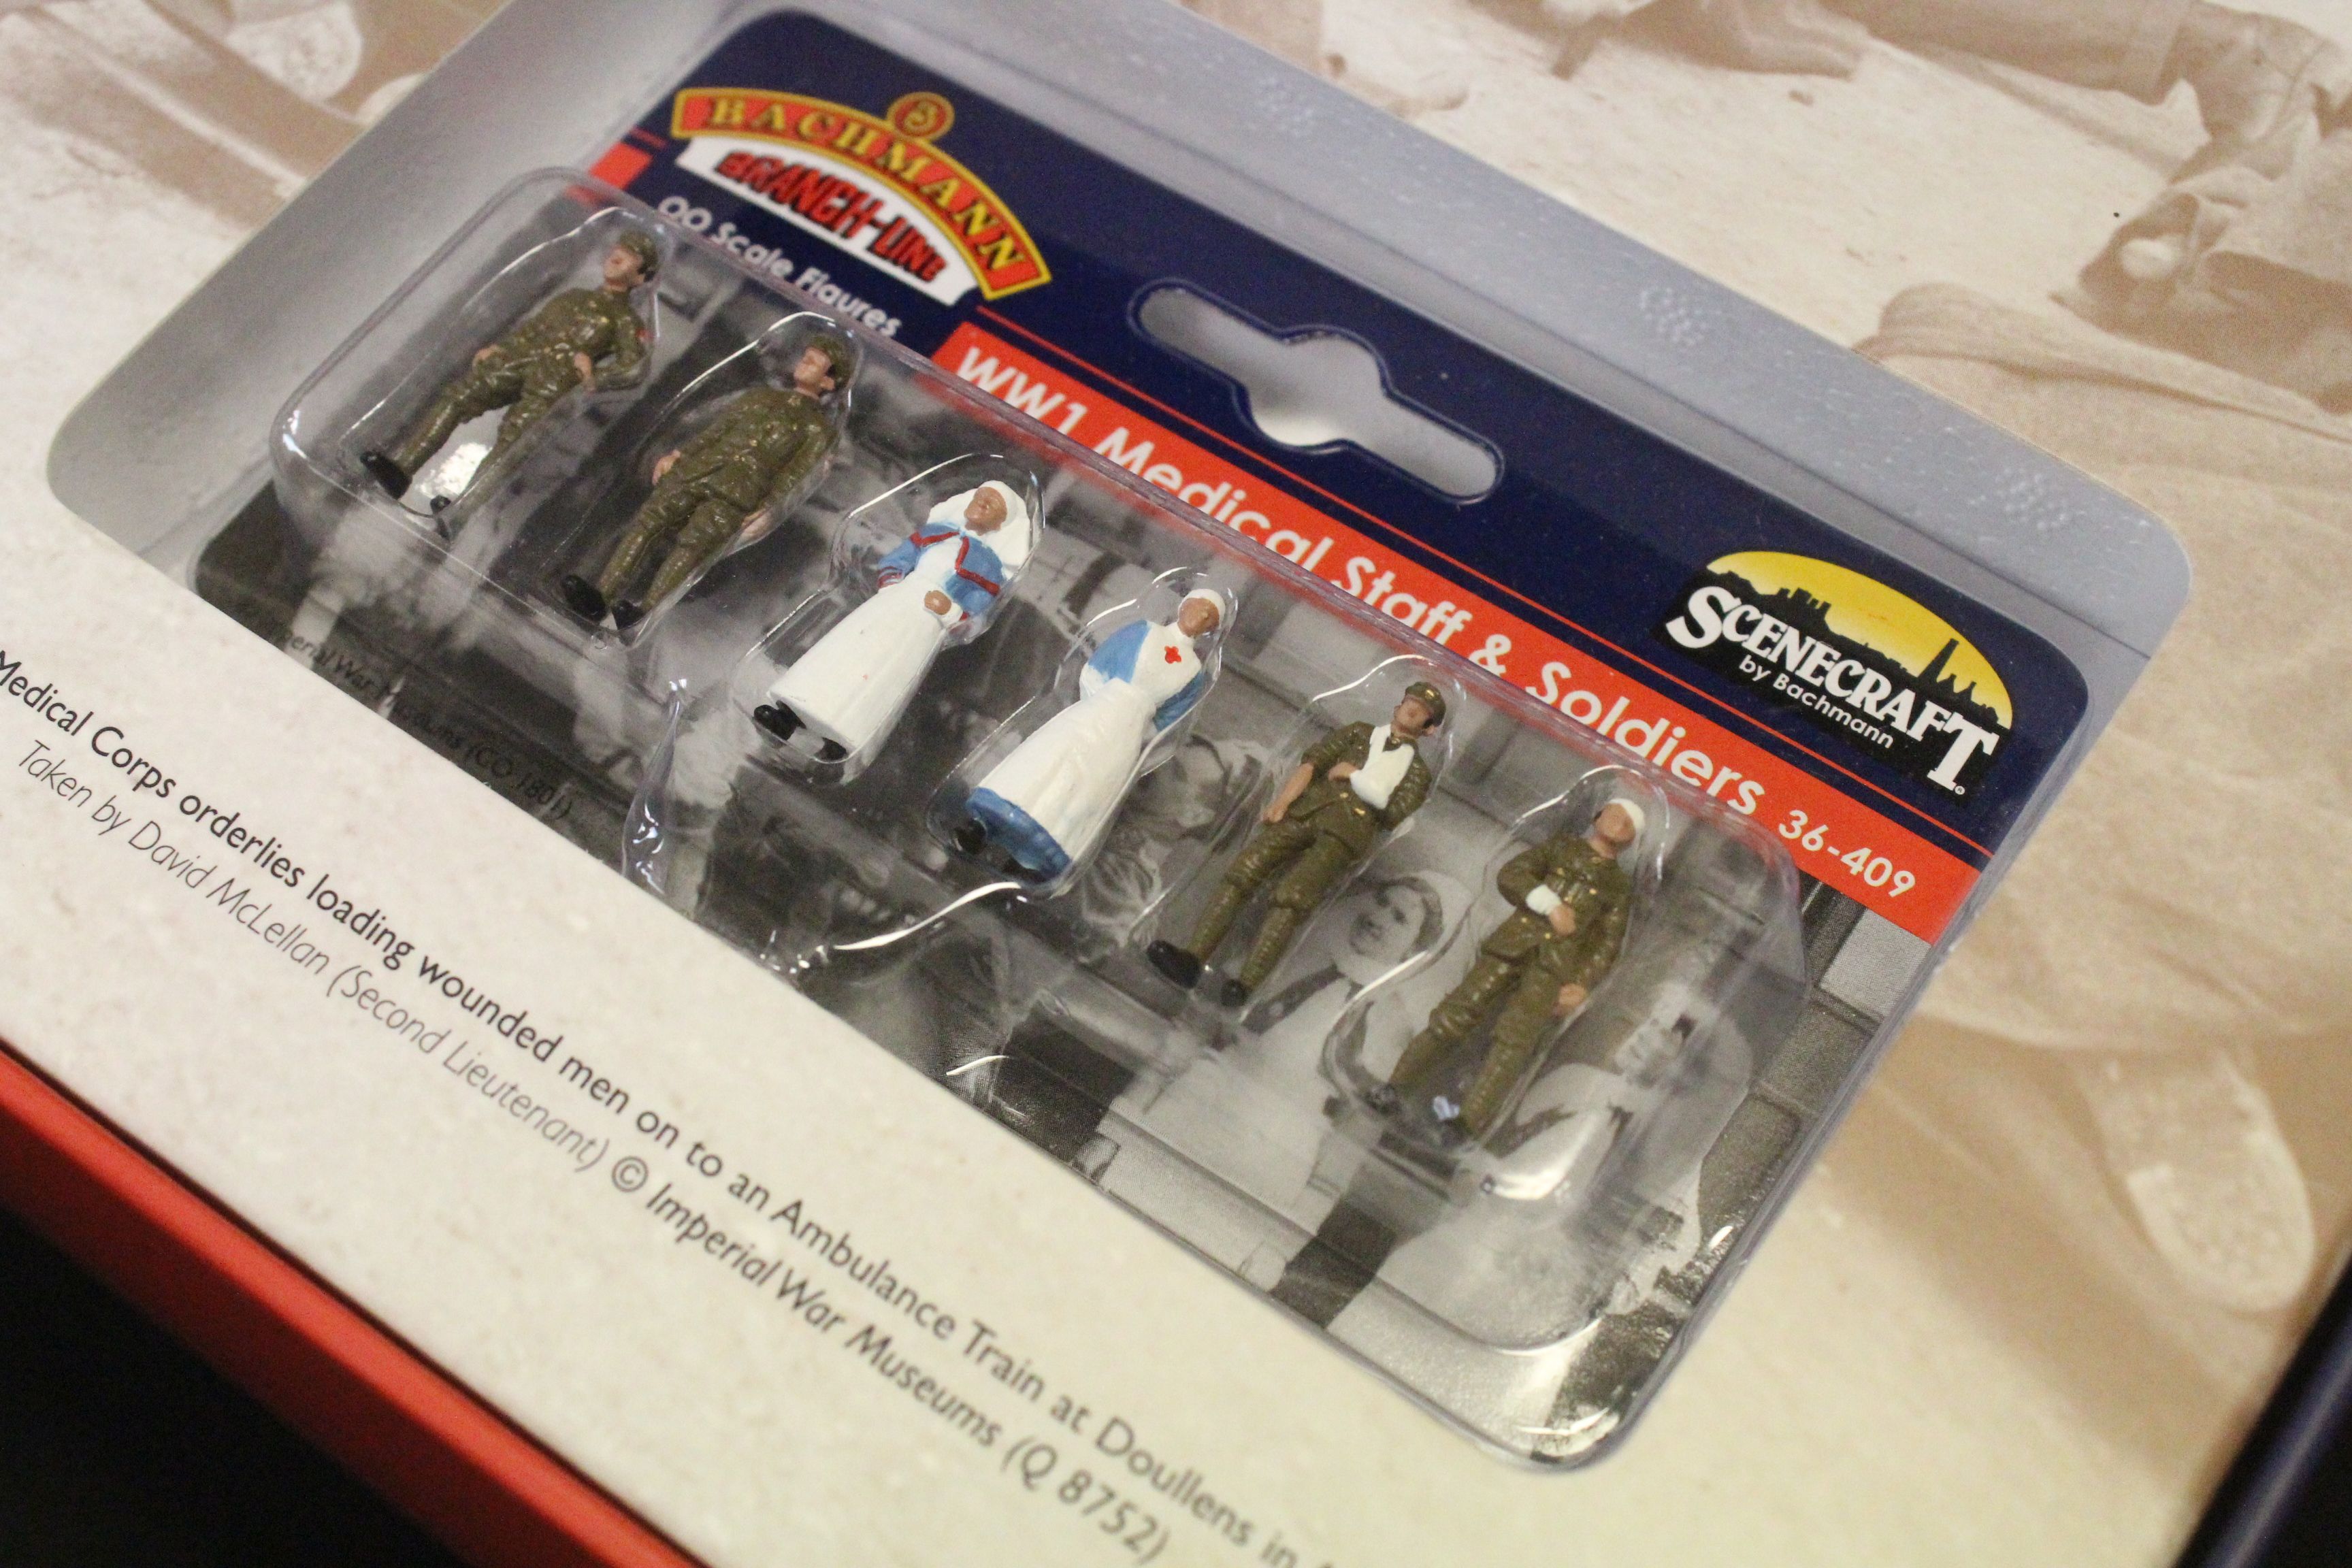 Boxed Bachmann OO gauge 30-325 First World War Ambulance Train No 40 Special Commemorative Edition - Image 6 of 7